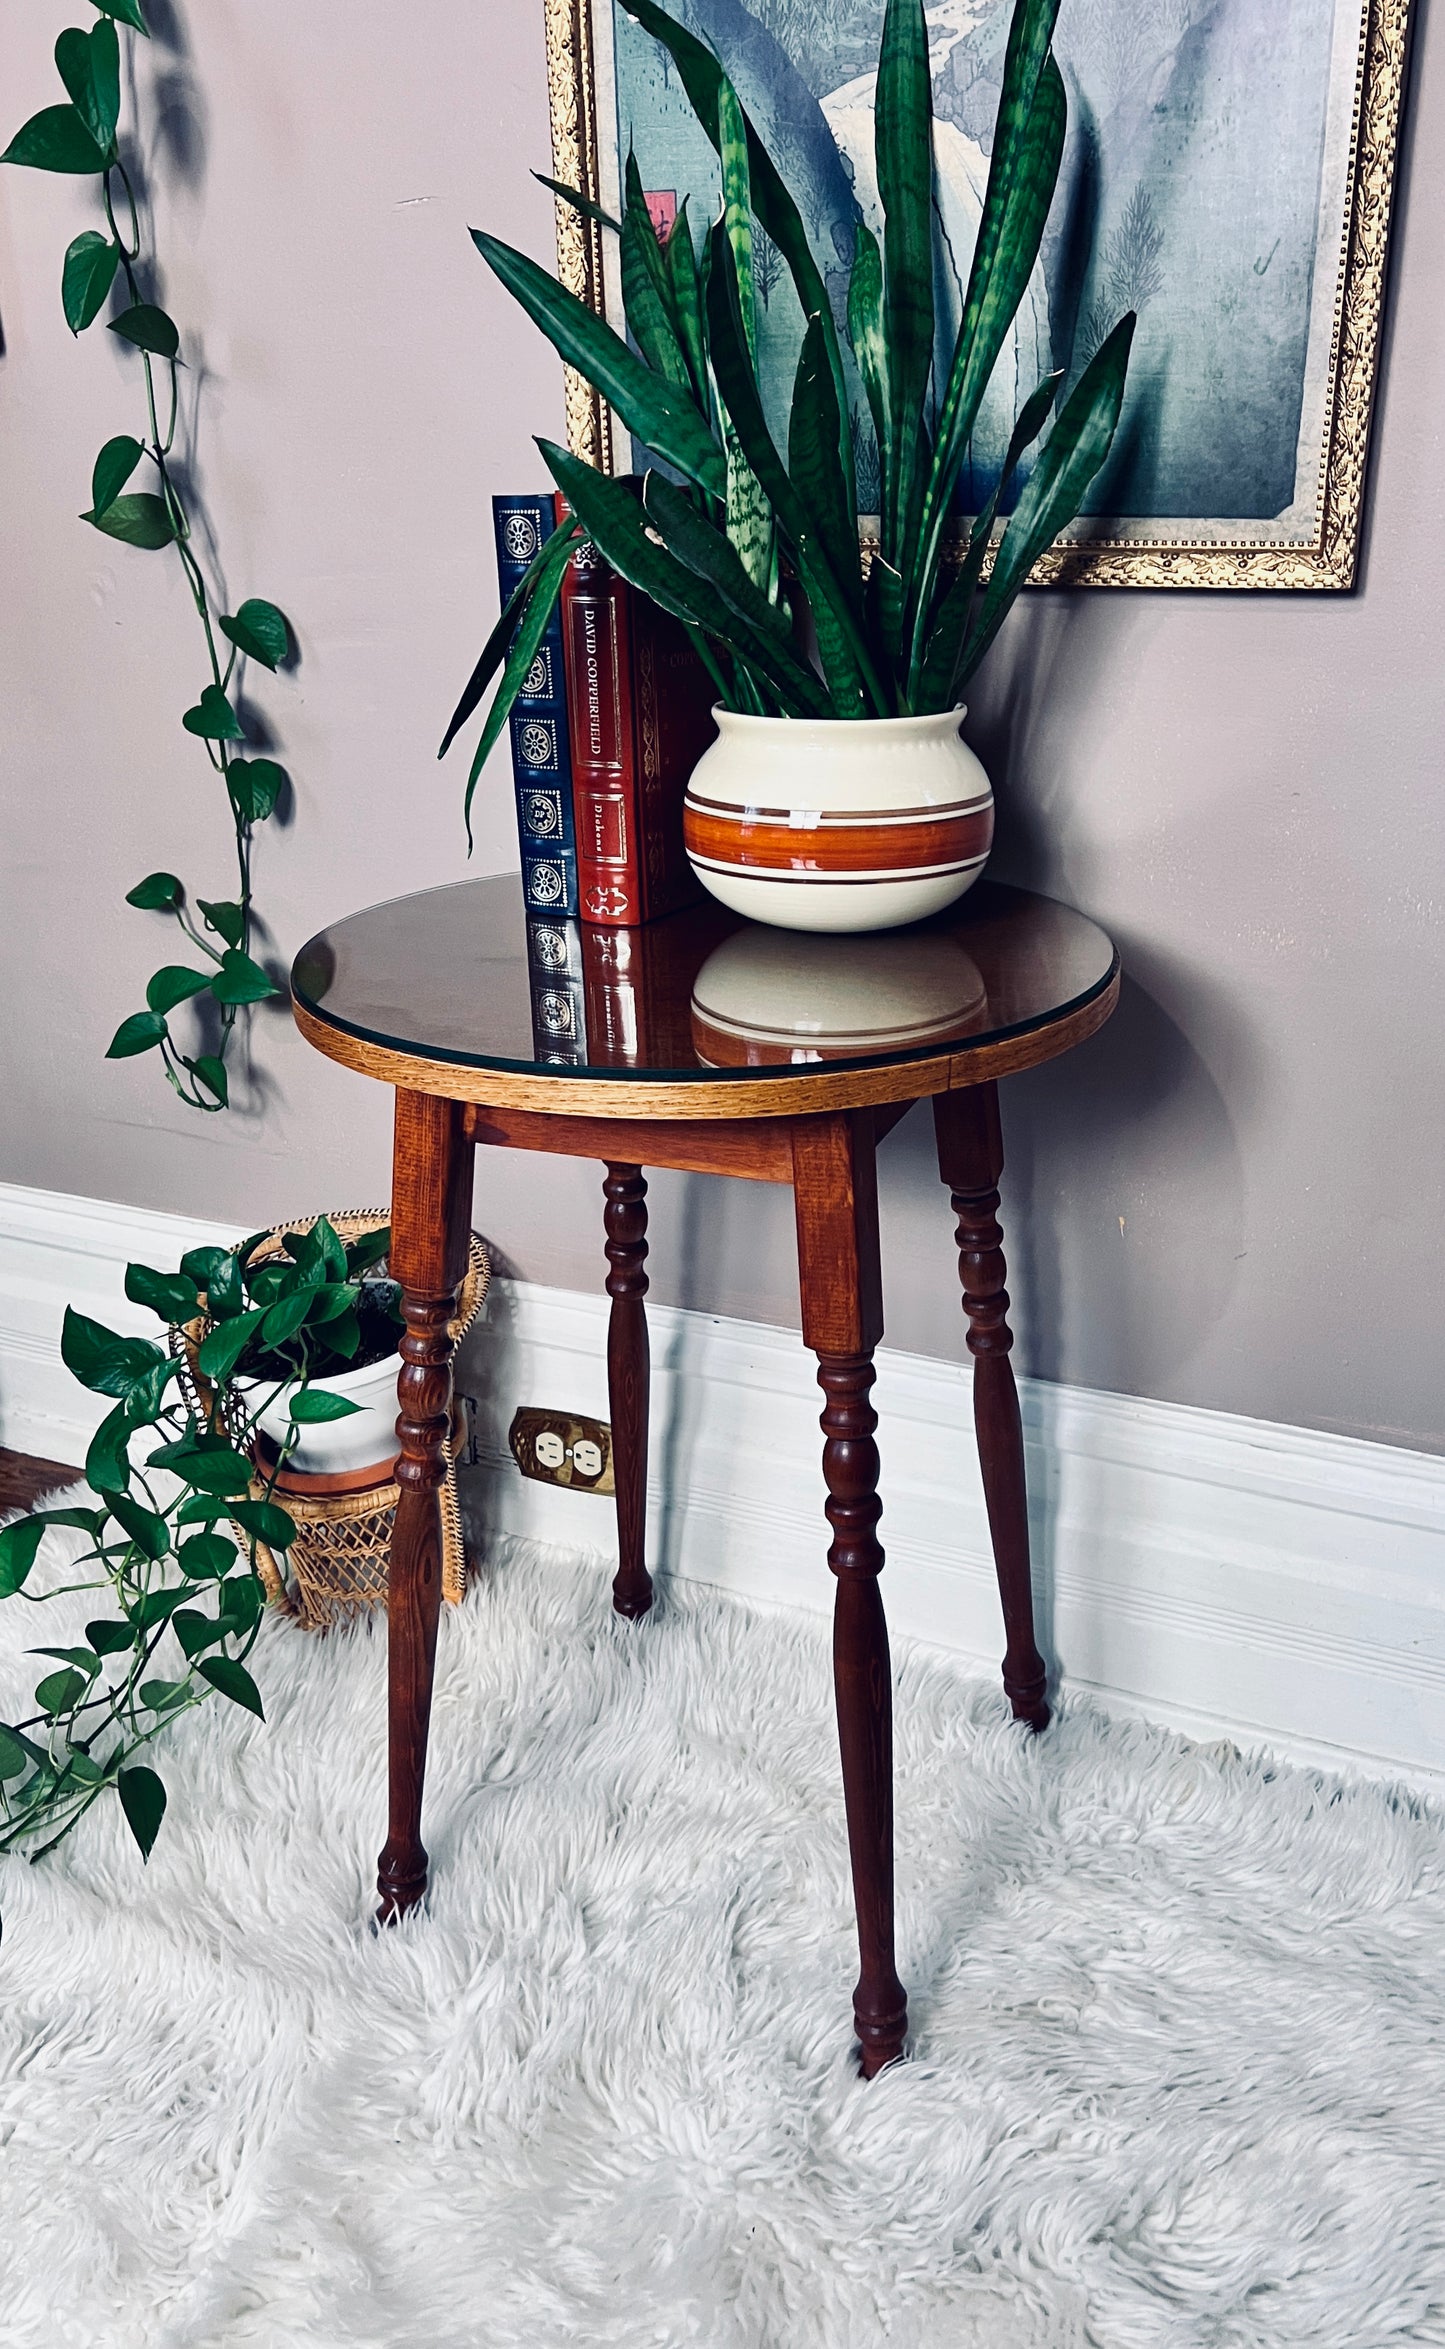 The Lovely Round Side Table